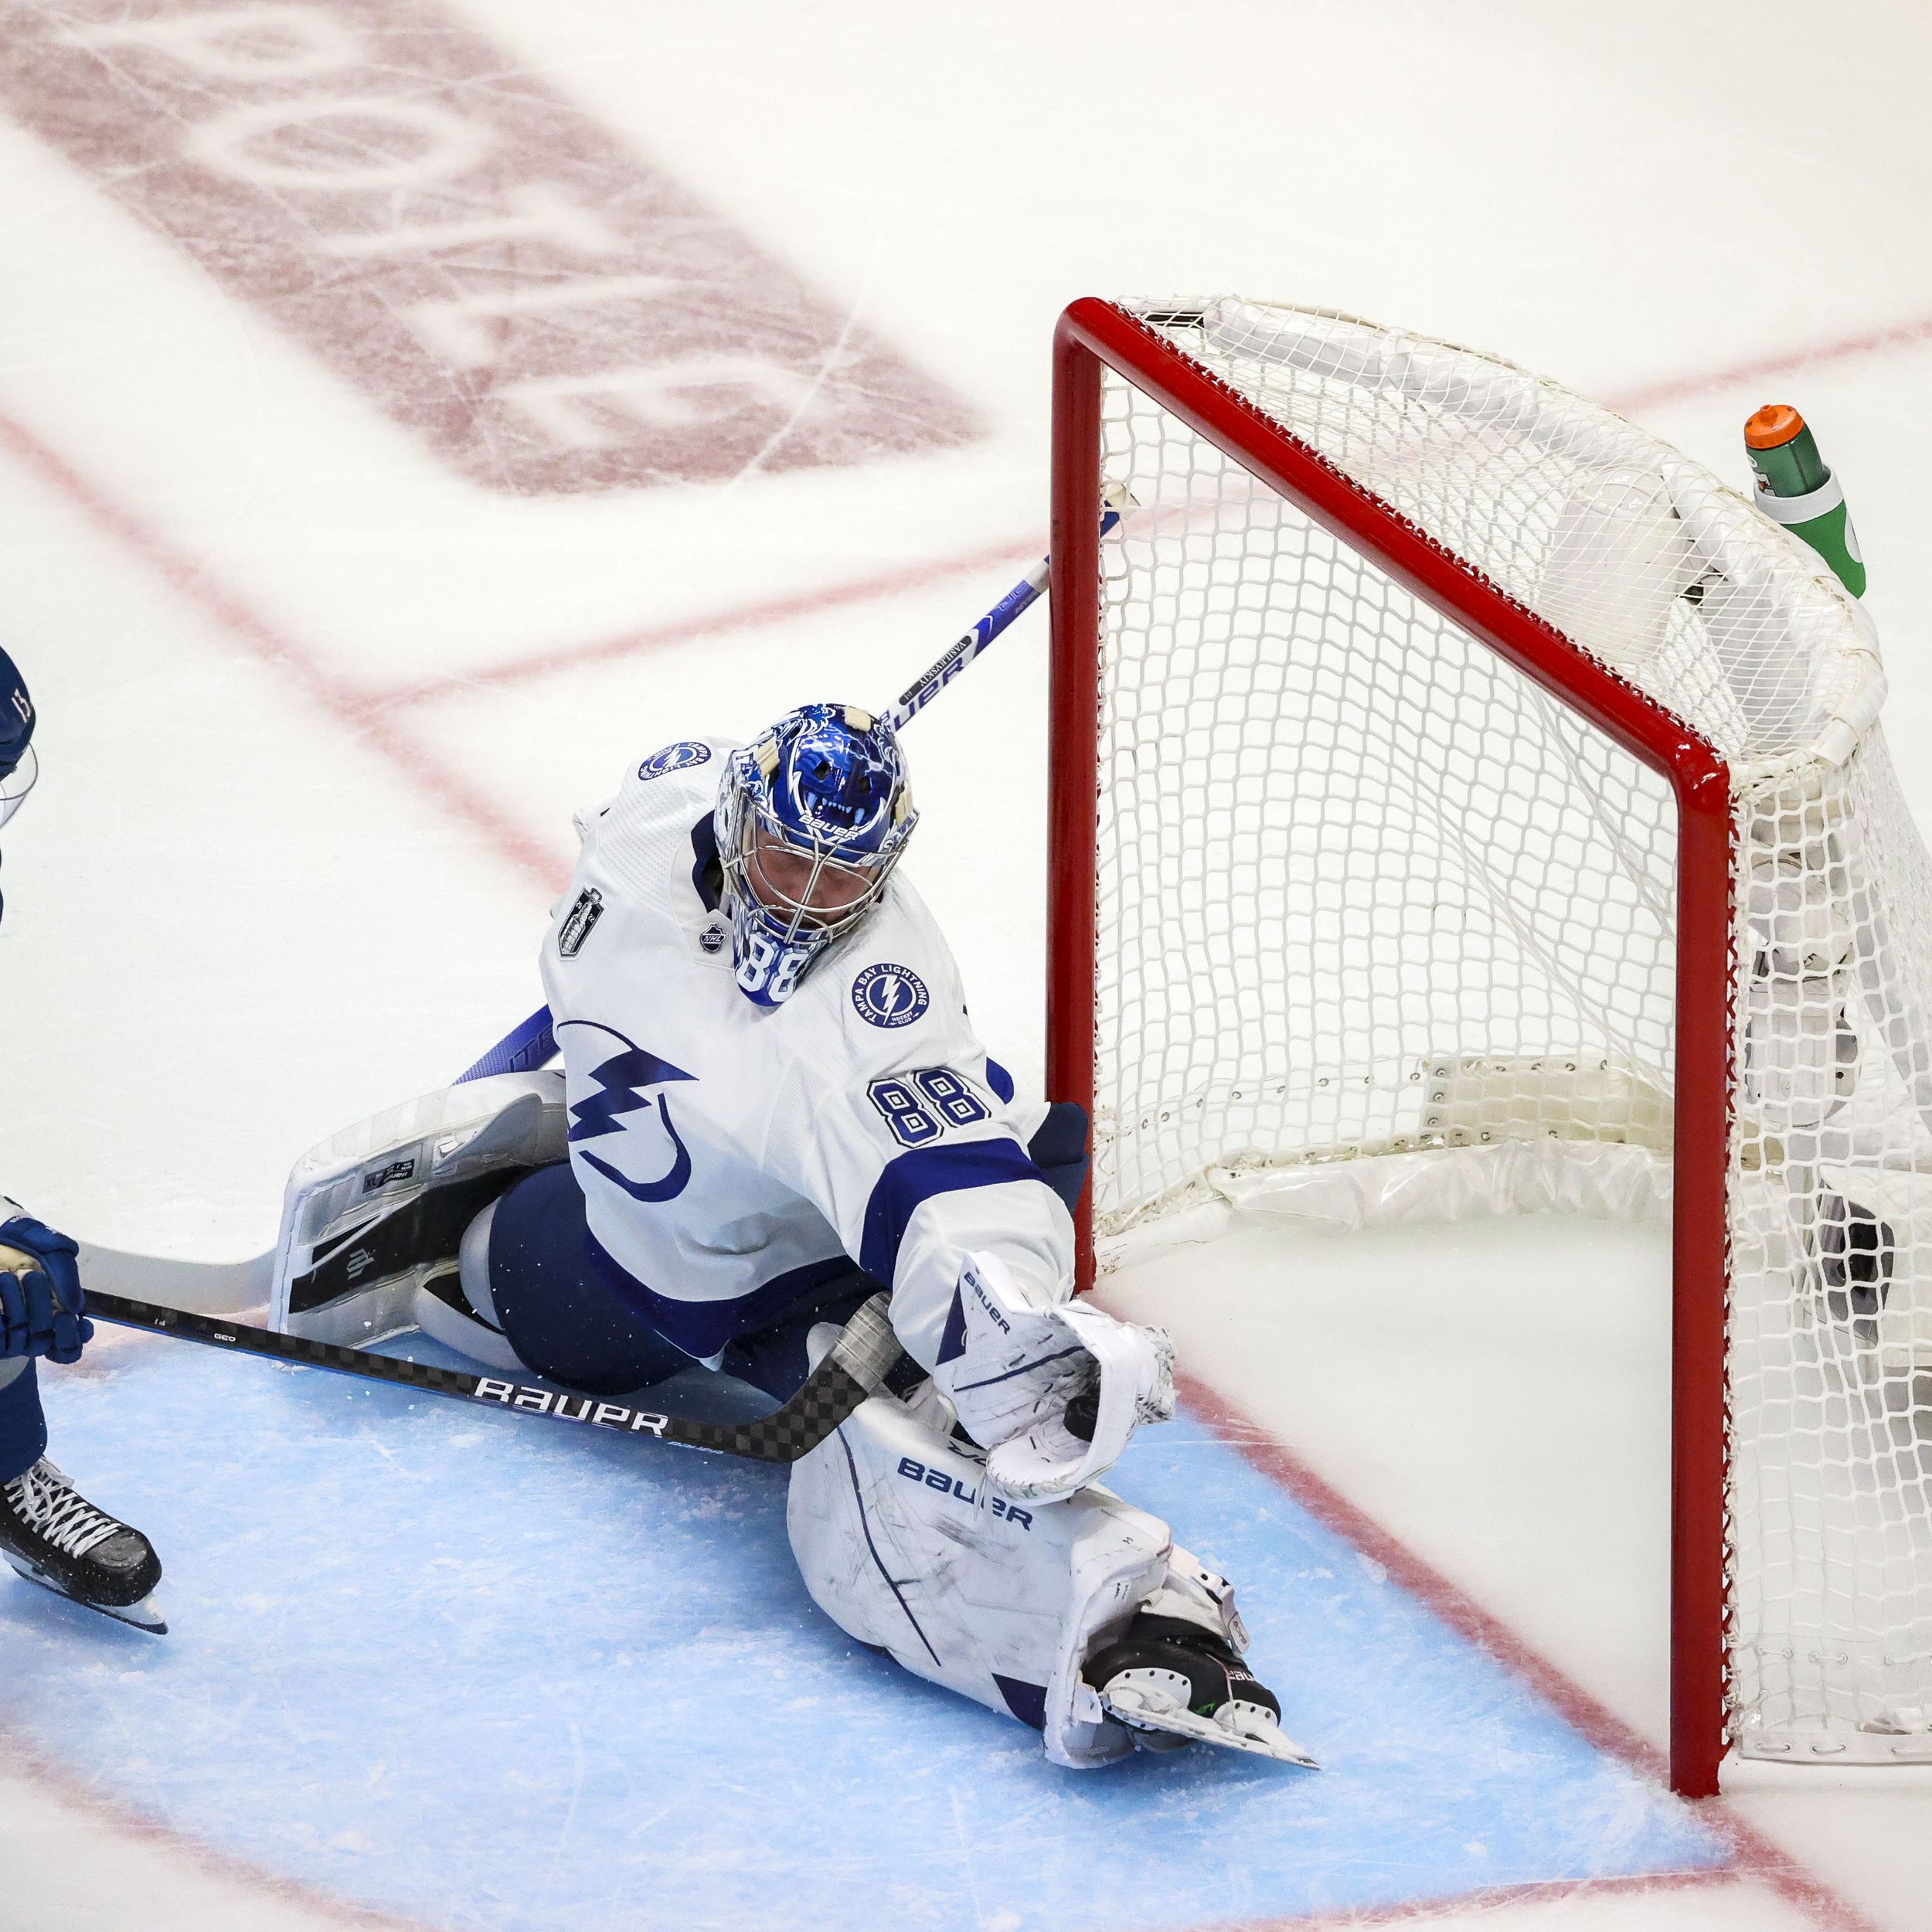 Valeri Nichushkin is turning into a star against Lightning in Stanley Cup  Final